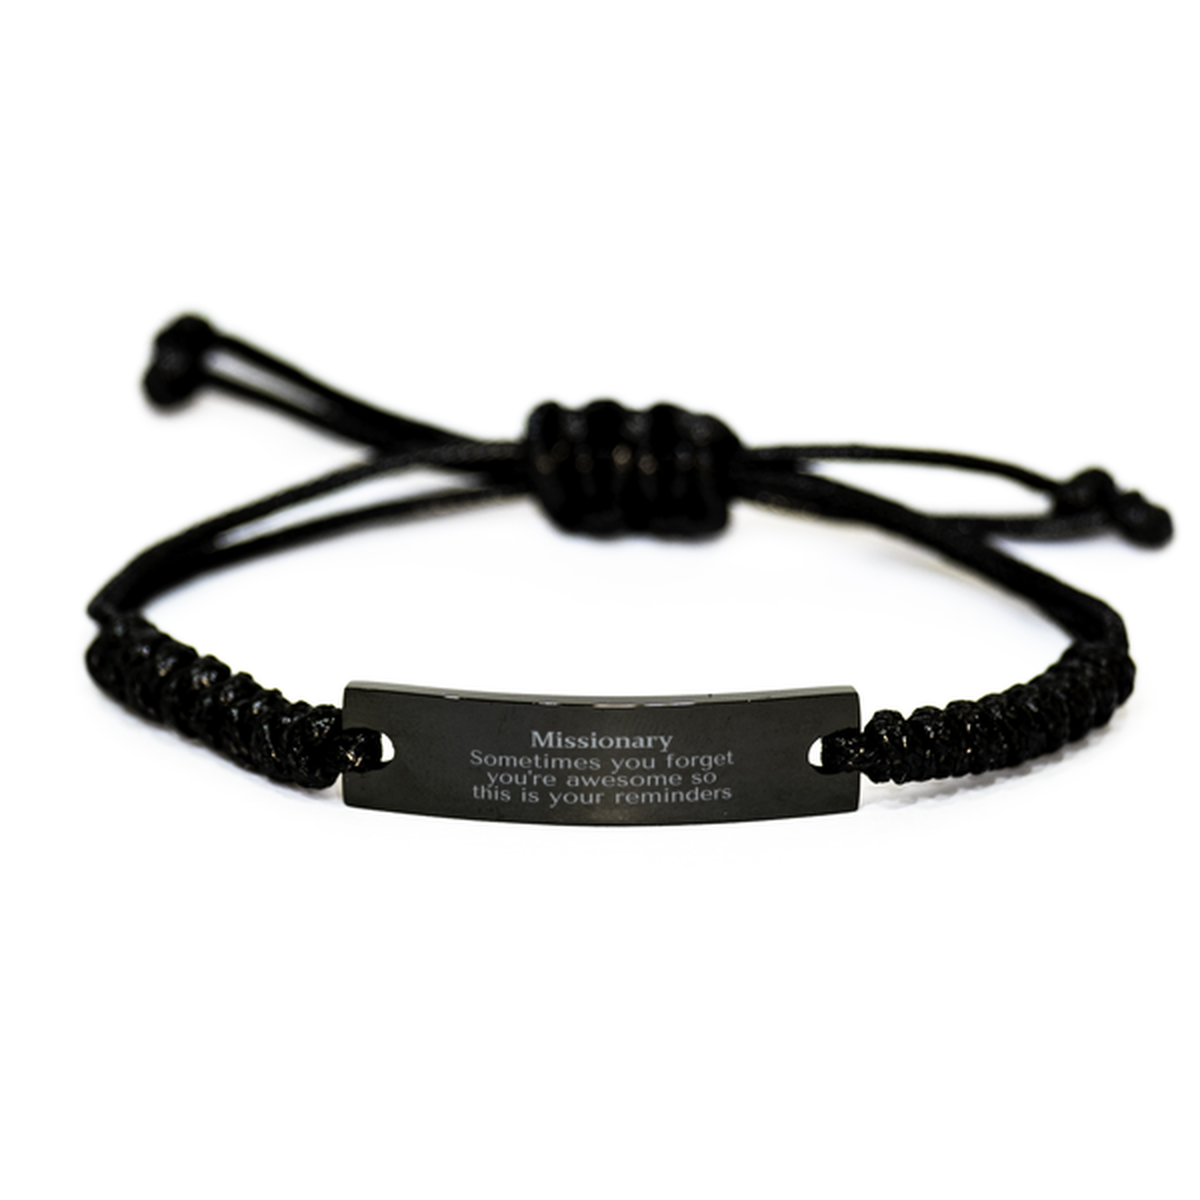 Sentimental Missionary Black Rope Bracelet, Missionary Sometimes you forget you're awesome so this is your reminders, Graduation Christmas Birthday Gifts for Missionary, Men, Women, Coworkers